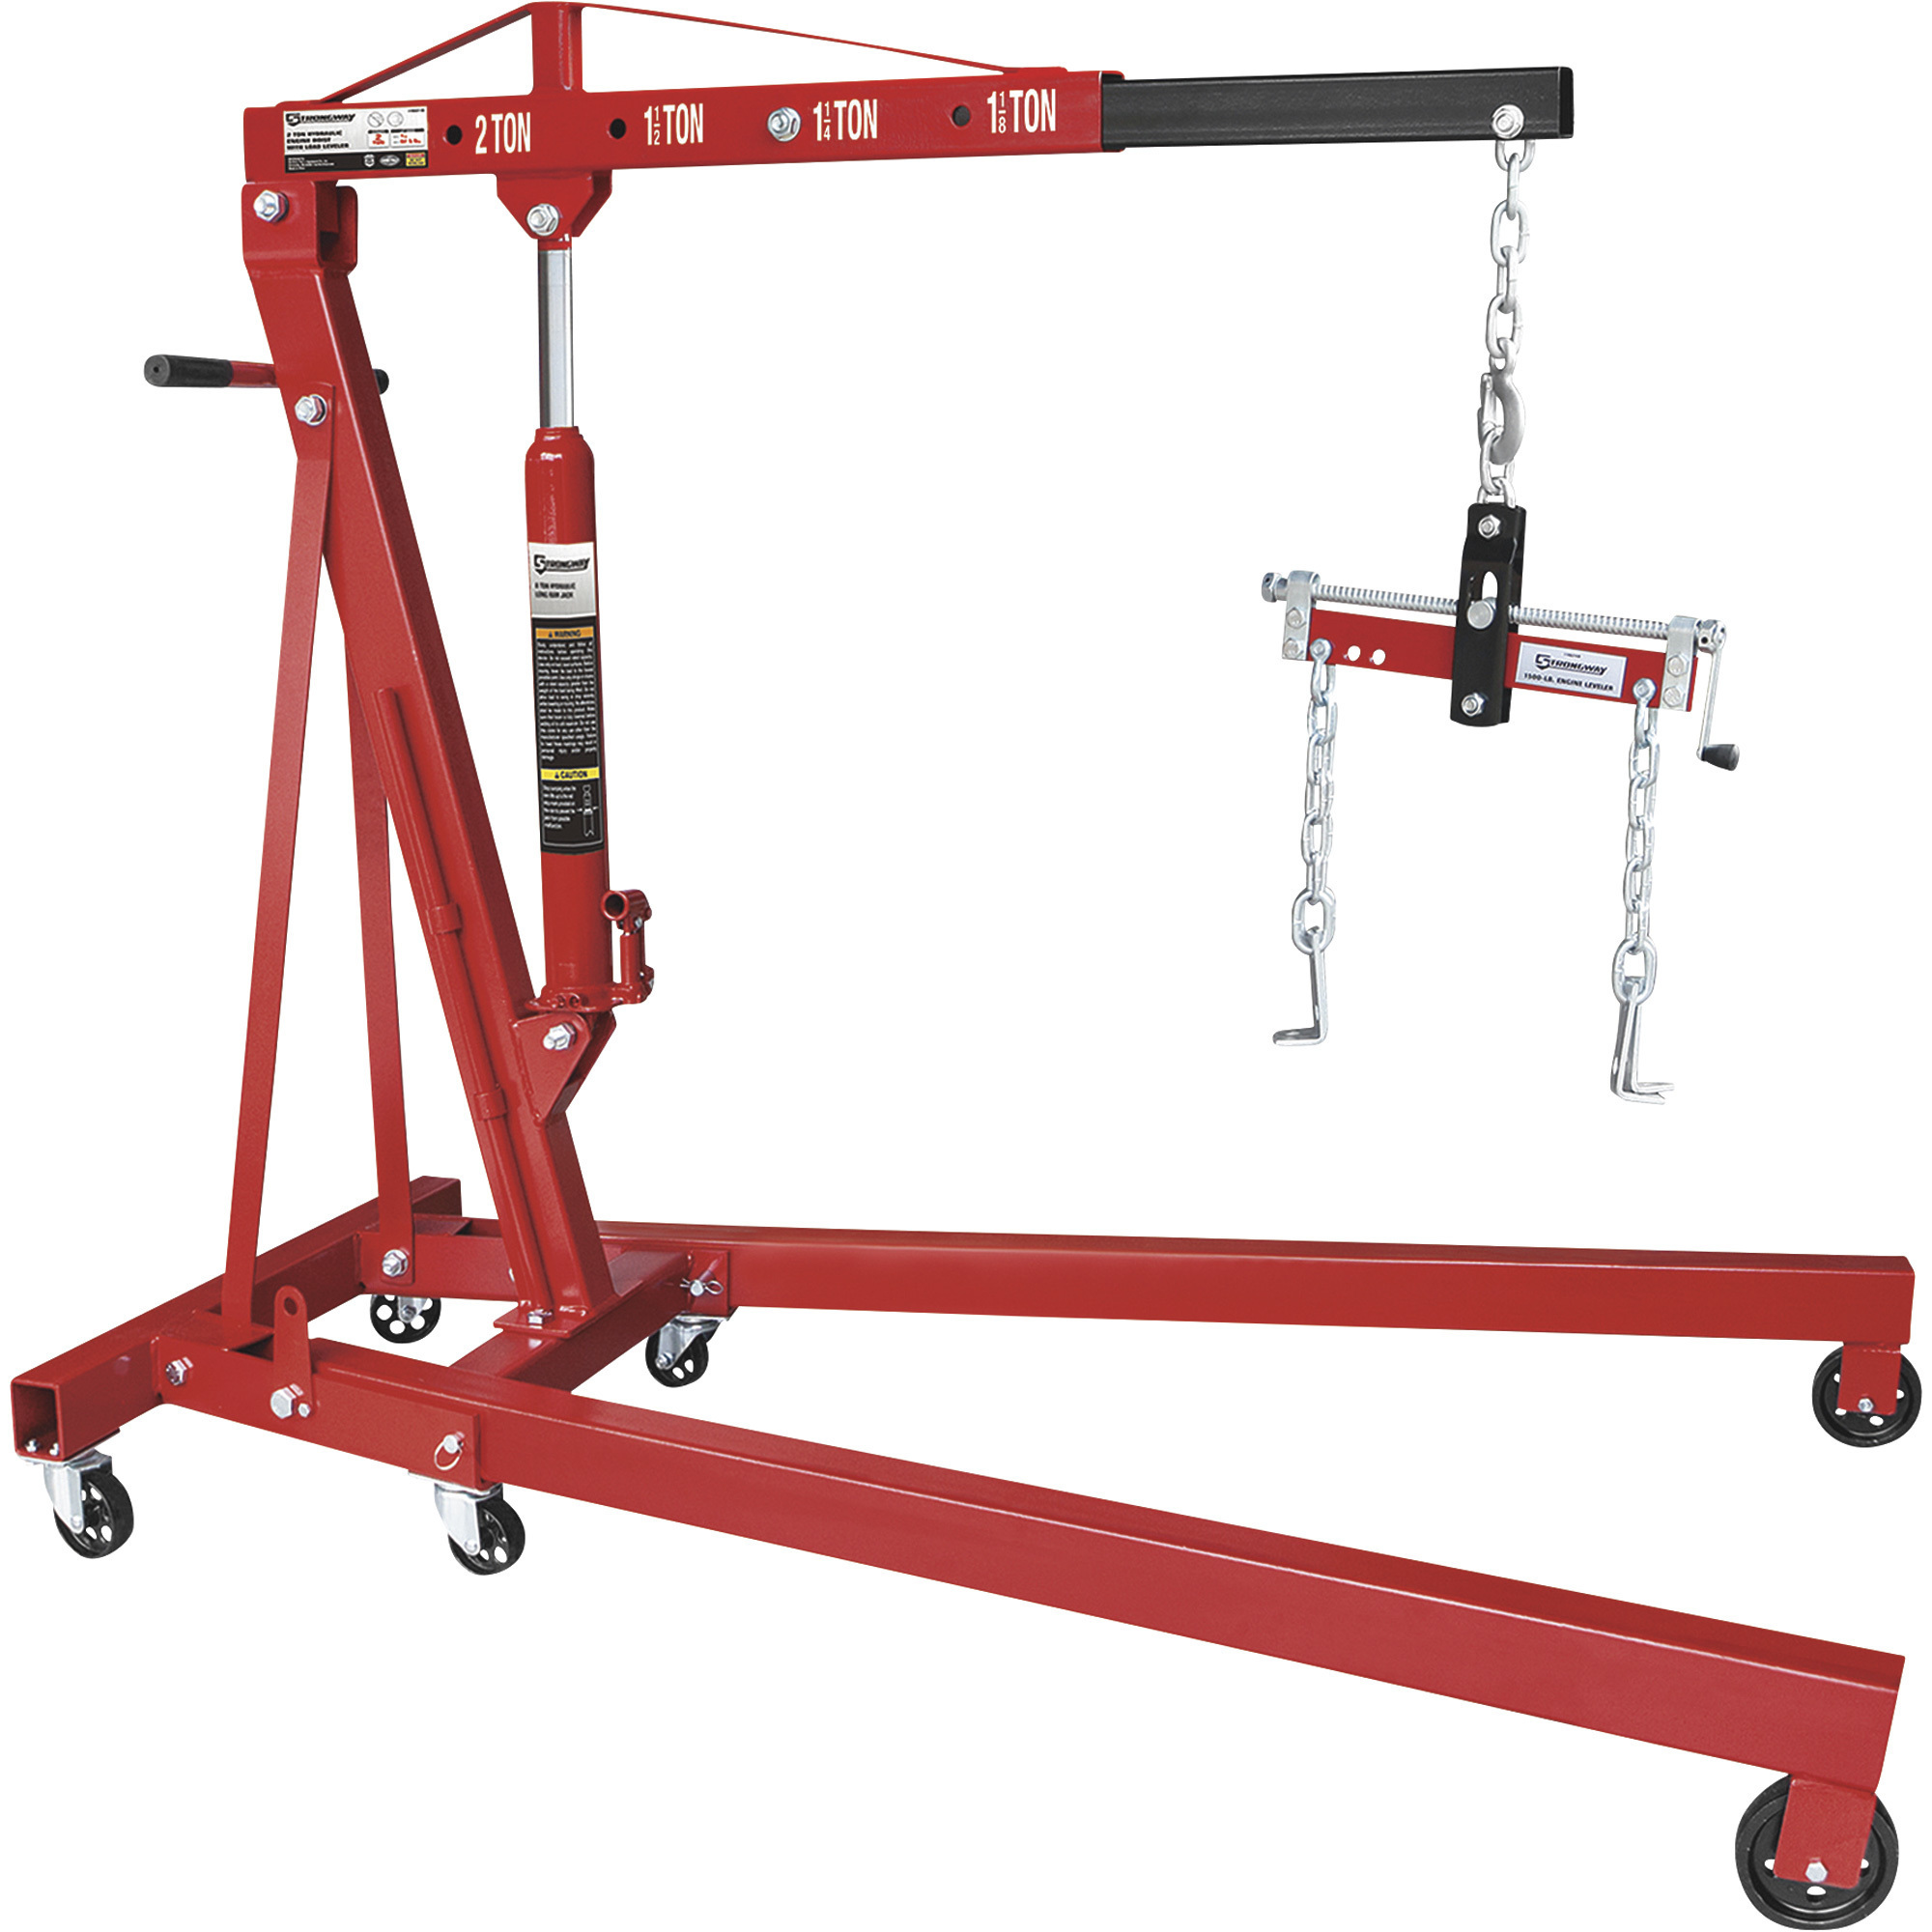 Strongway Hydraulic 2-Ton Engine Hoist with Load Leveler - 1in.-82 5/8in. Lift Range